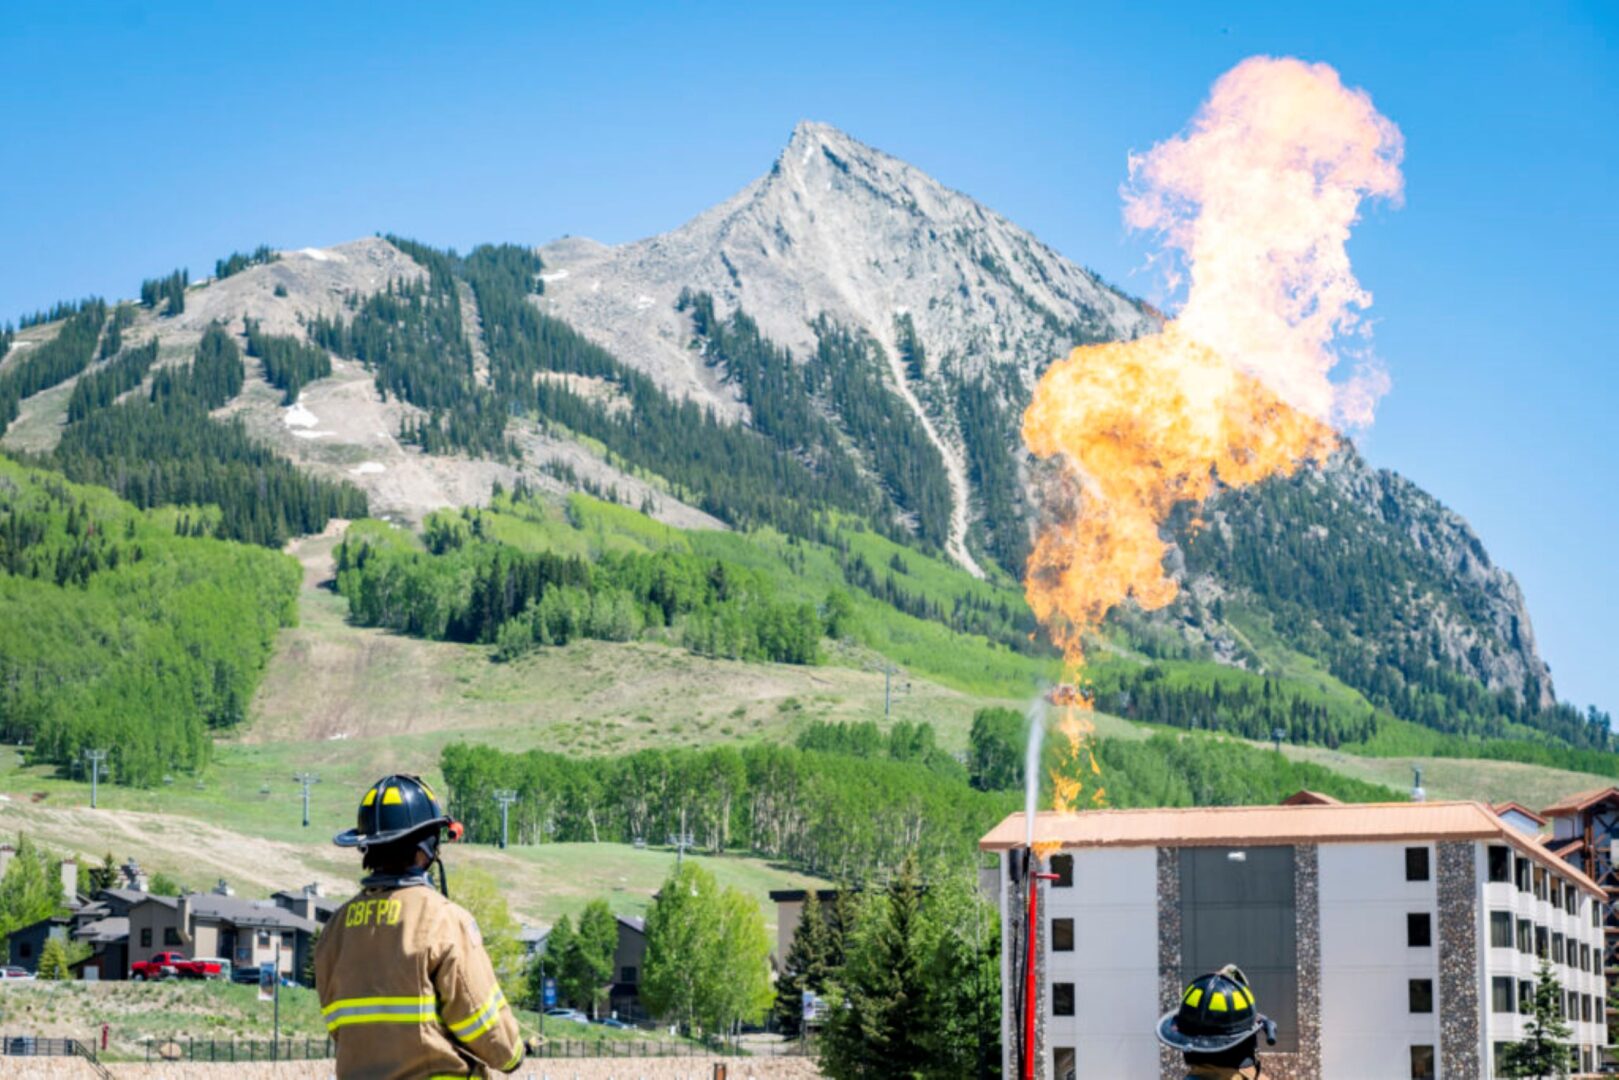 Propane Training photo with Mt. Crested Butte in the background, two firefighters and a propane flame in the foreground